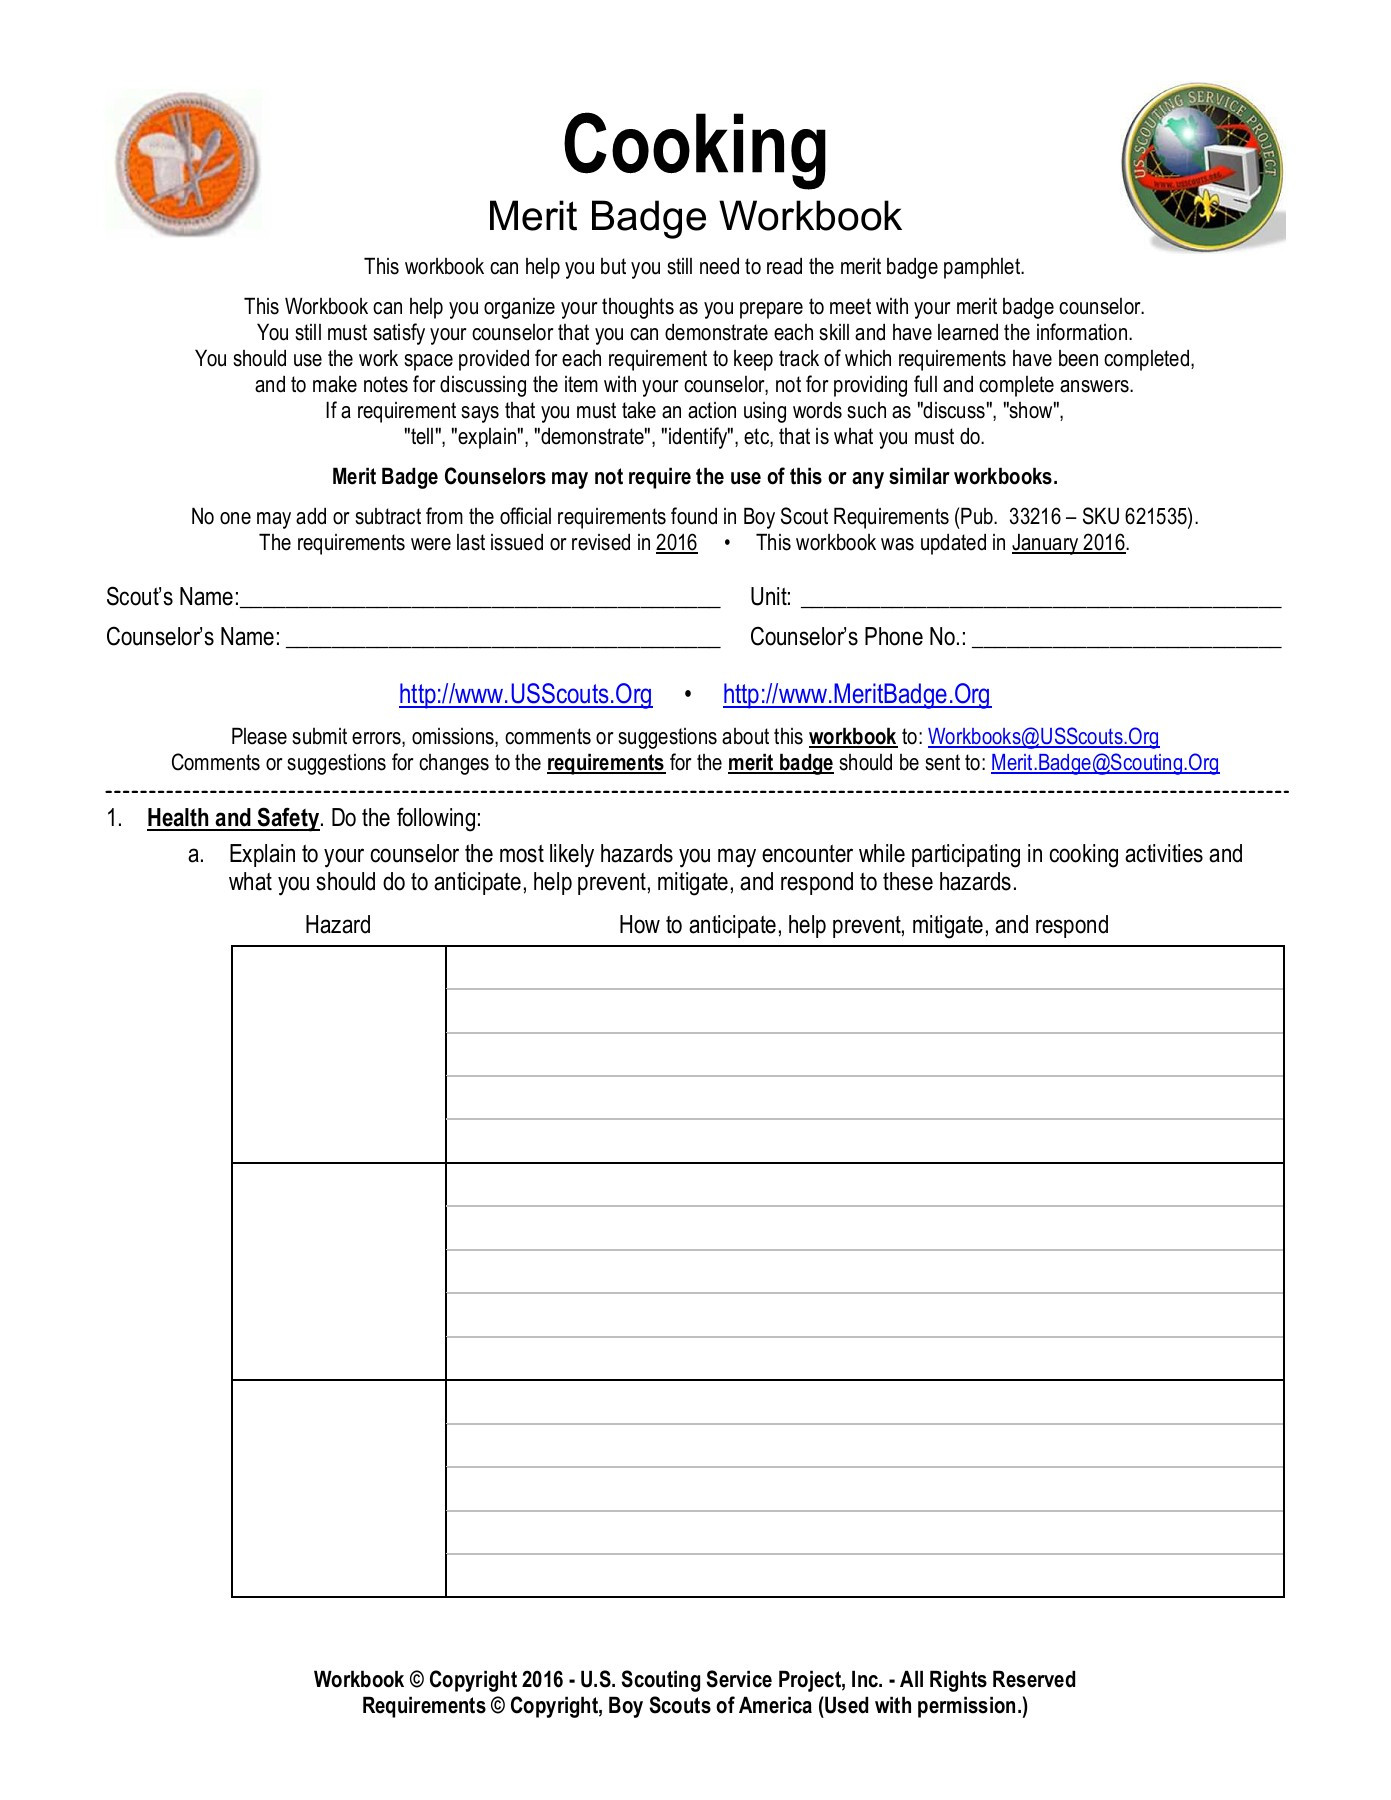 Fire Safety Merit Badge Worksheet Cooking Meritbadge Text Version Anyflip Cub Scout Merit